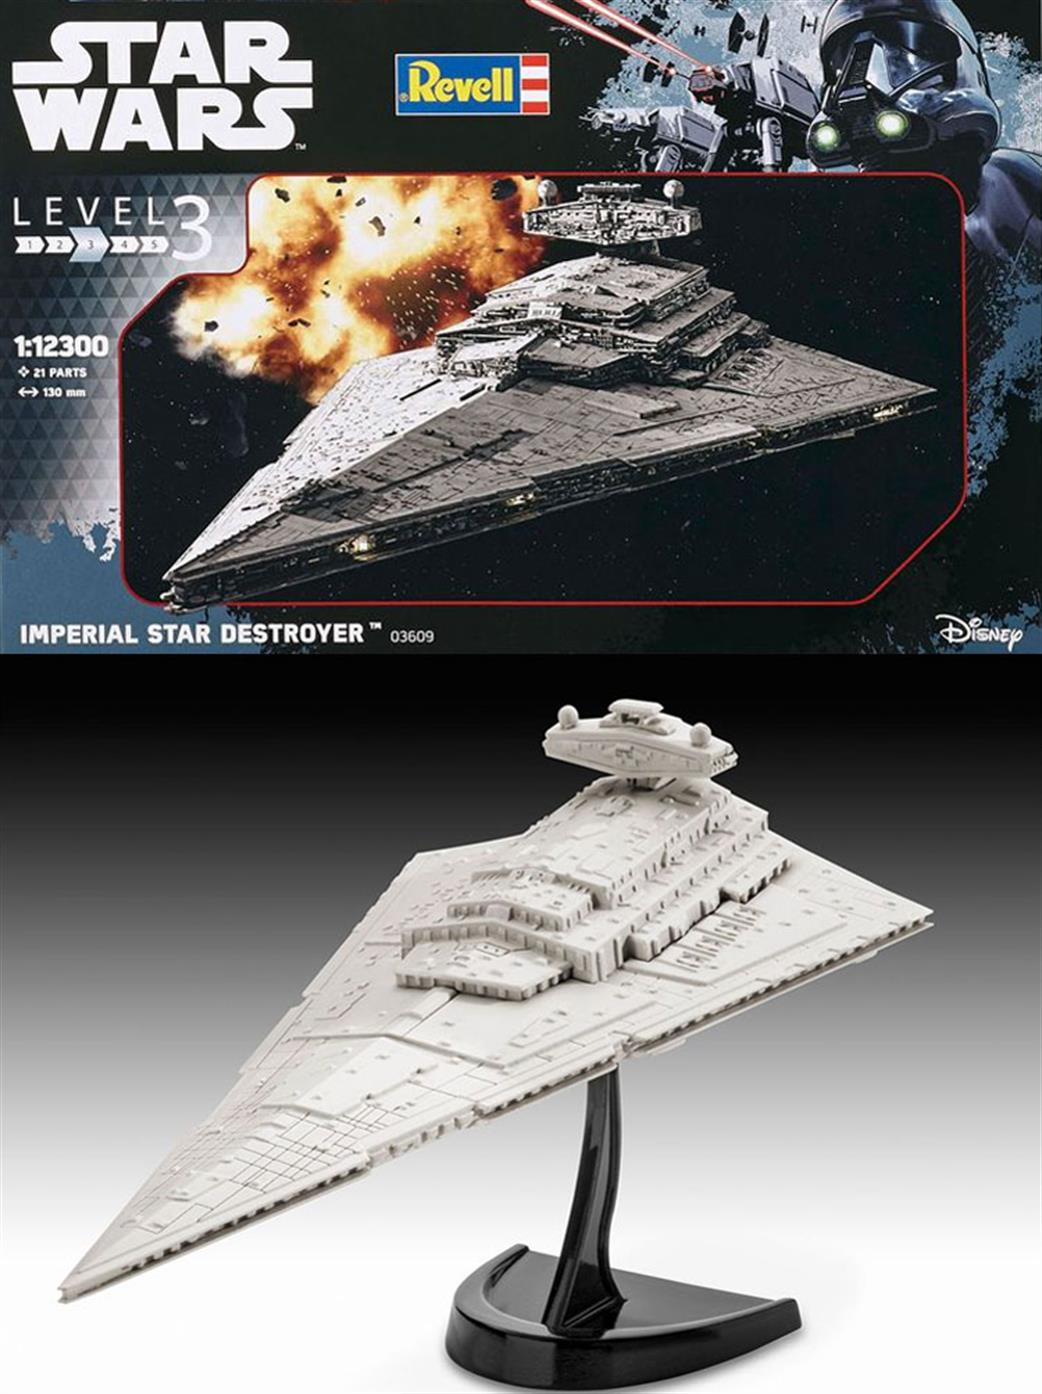 Revell 1/12300 03609 Imperial Star Destroyer from Star Wars